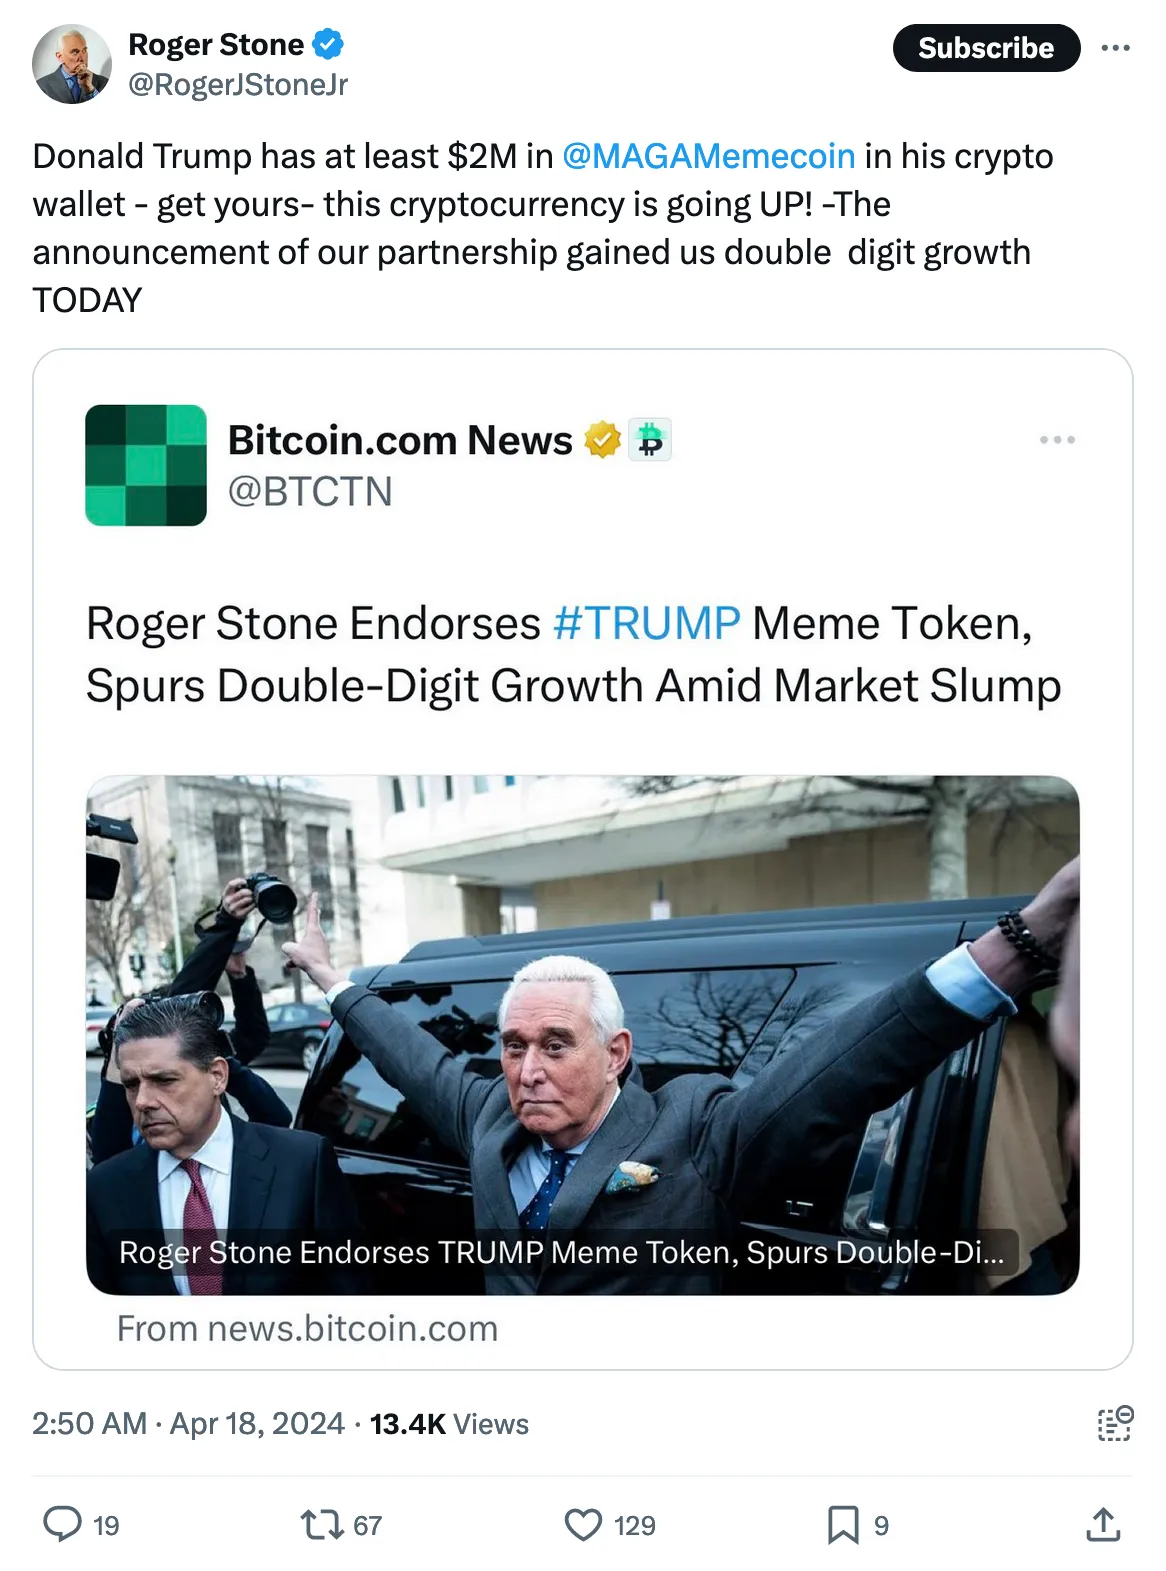 Donald Trump has at least $2M in 
@MAGAMemecoin
 in his crypto wallet - get yours- this cryptocurrency is going UP! -The announcement of our partnership gained us double  digit growth TODAY 
Tweeted at 2:50 AM · Apr 18, 2024